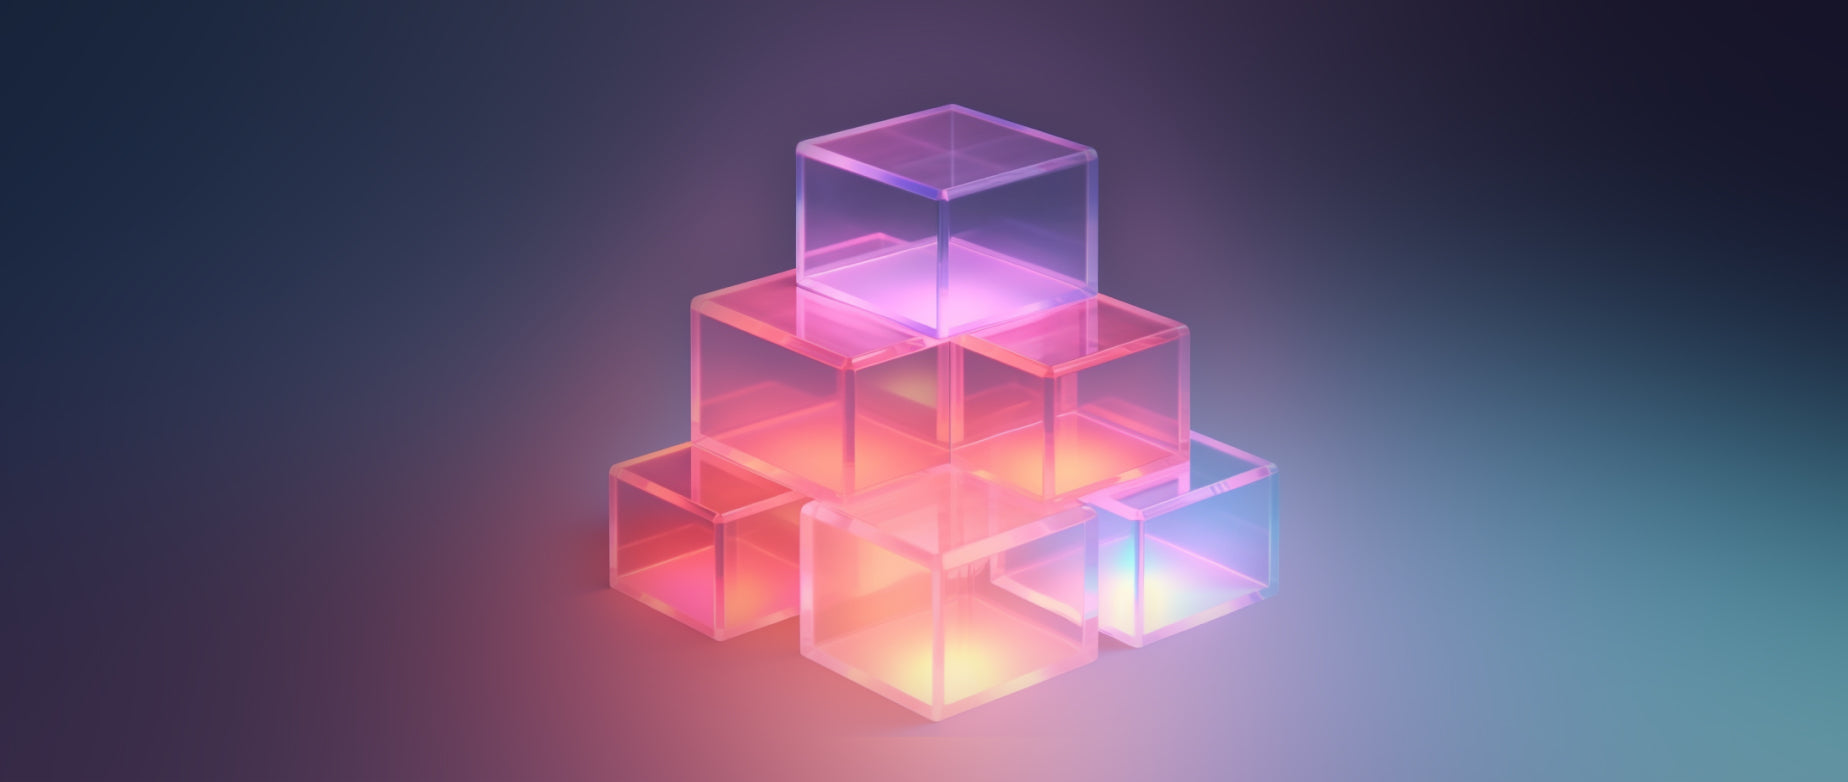 a stack of cubes: retail tech stack